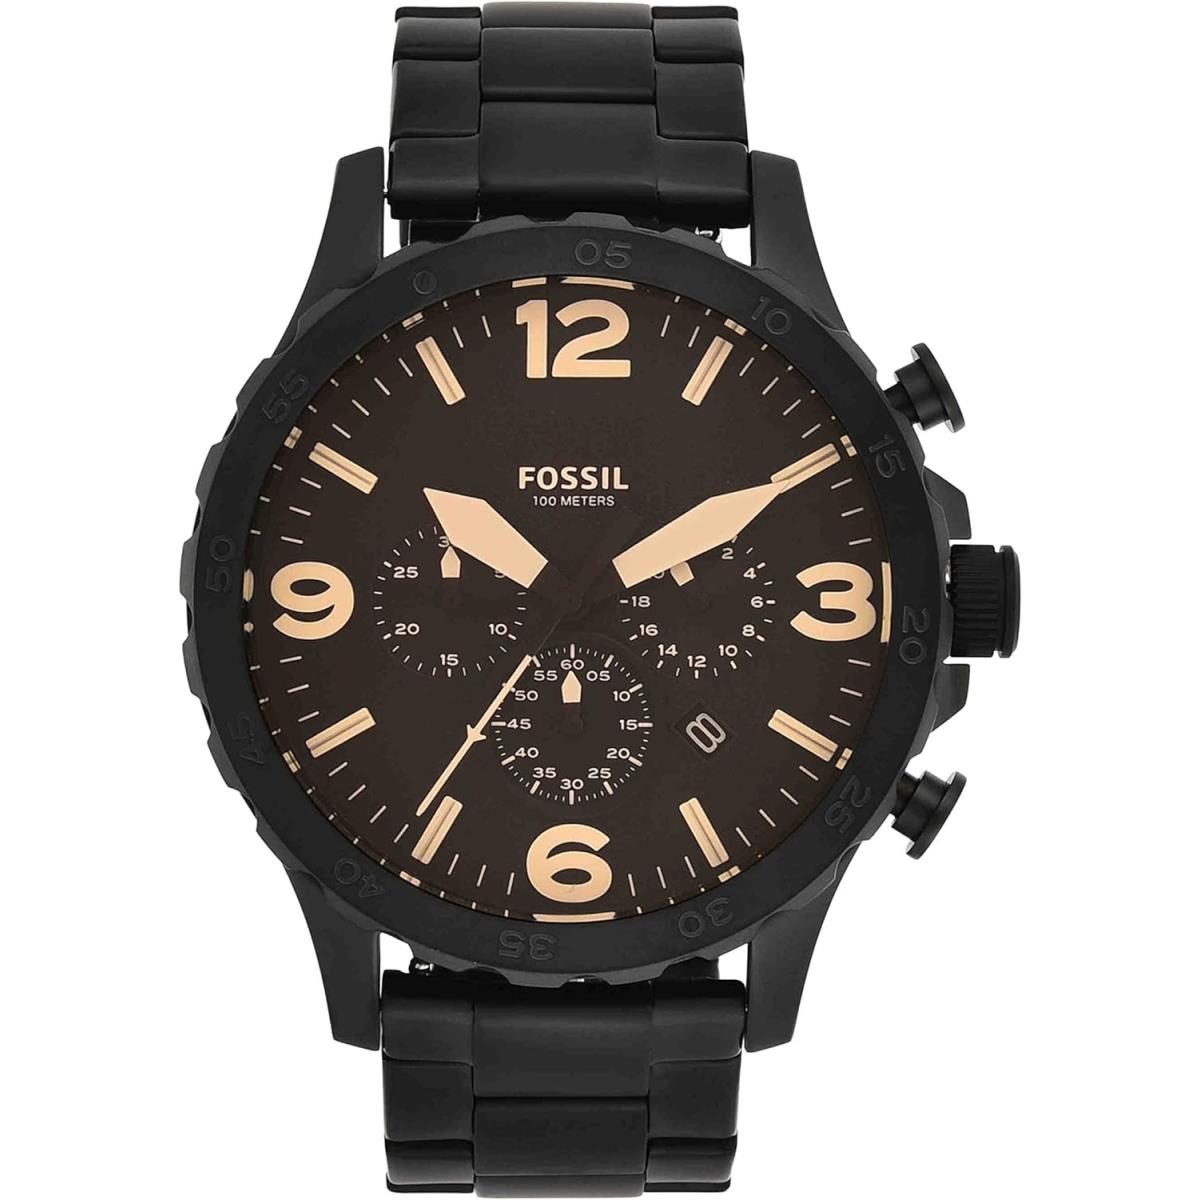 Fossil Nate Men`s Chronograph Watch with Stainless Steel or Leather Band Black/Brown